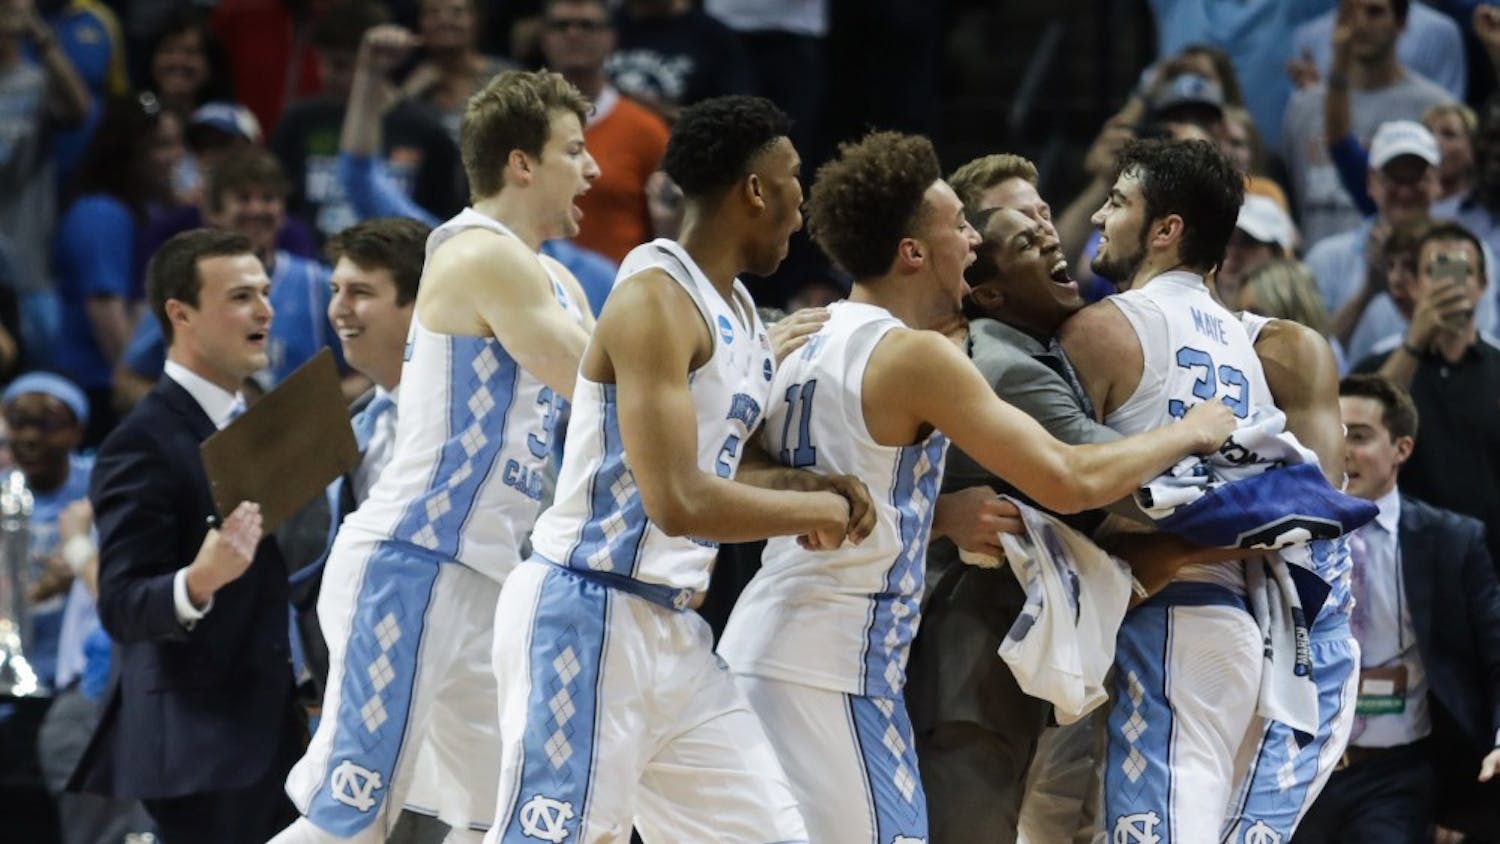 The UNC basketball team swarms Luke Maye (32) after winning  the NCAA Elite Eight game against Kentucky in Memphis on Sunday.